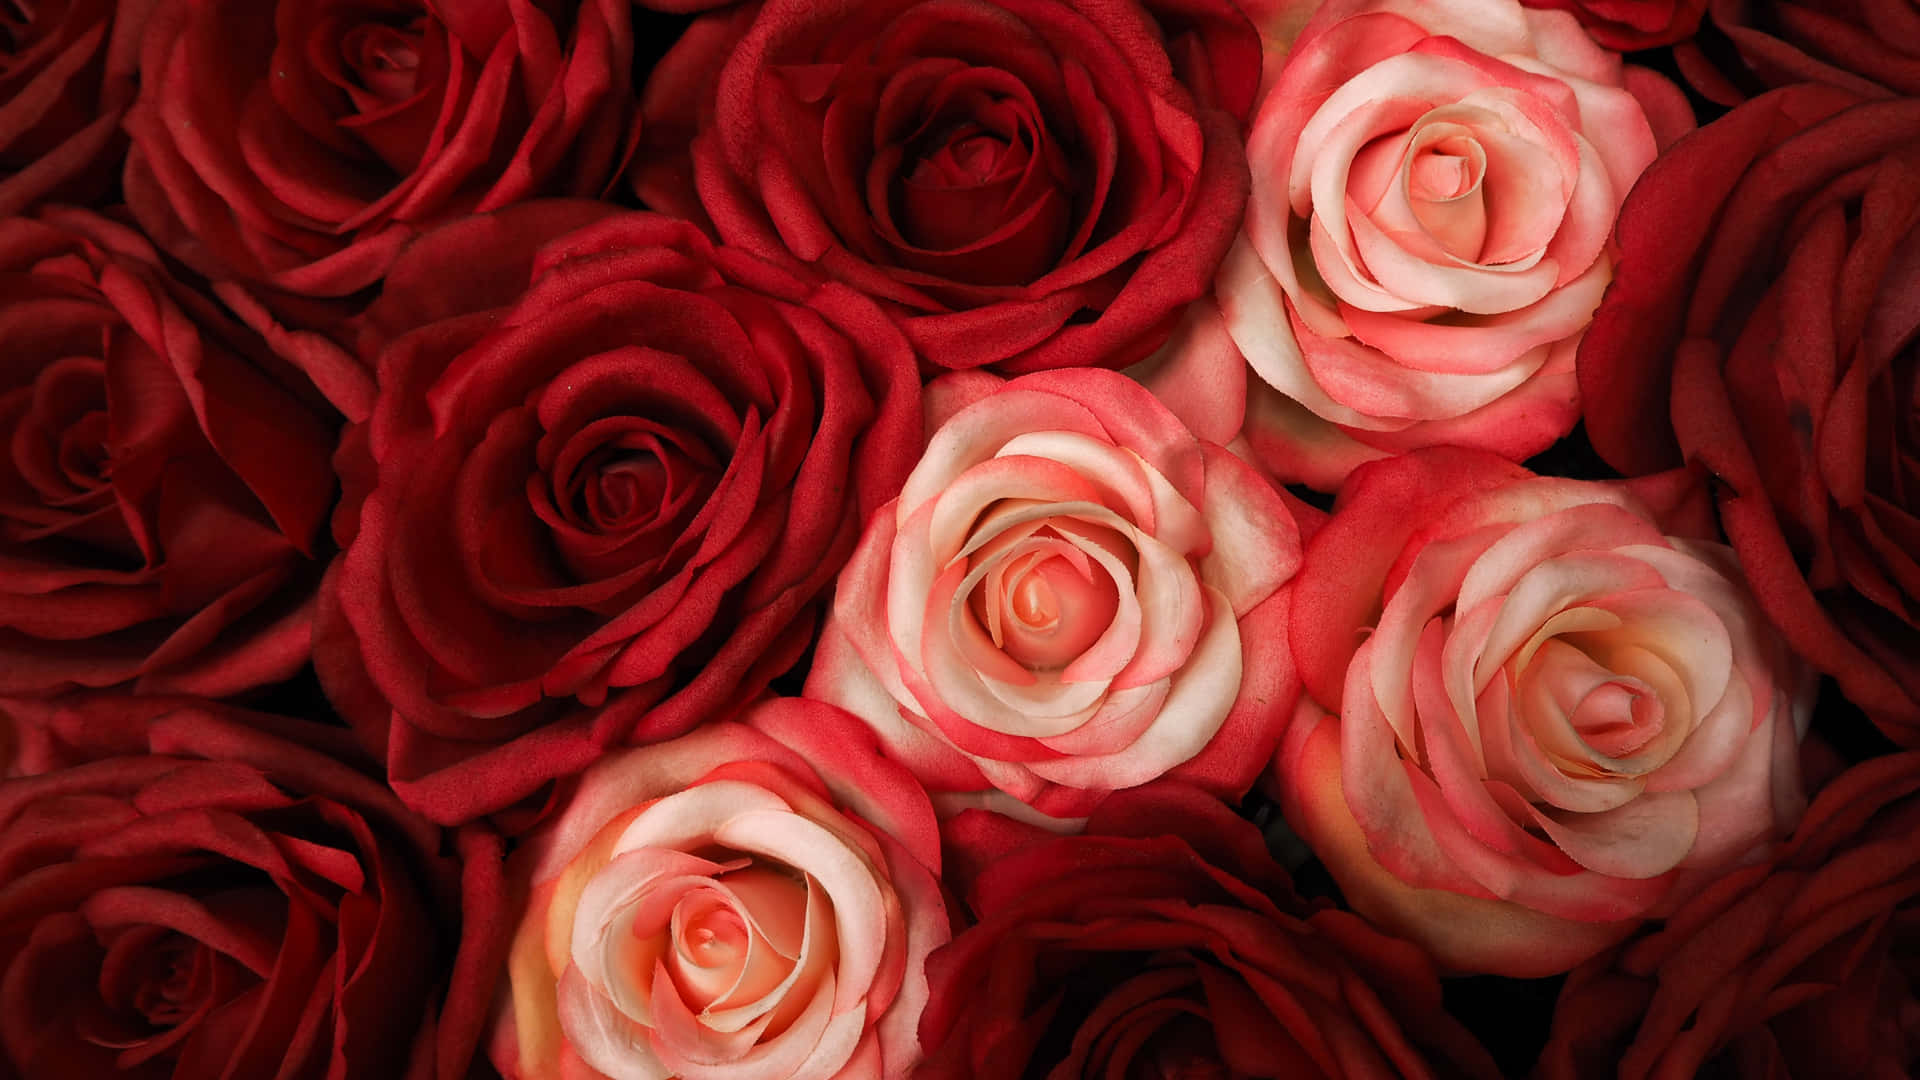 Red And White Roses - A Classic Symbol Of Undying Love. Wallpaper